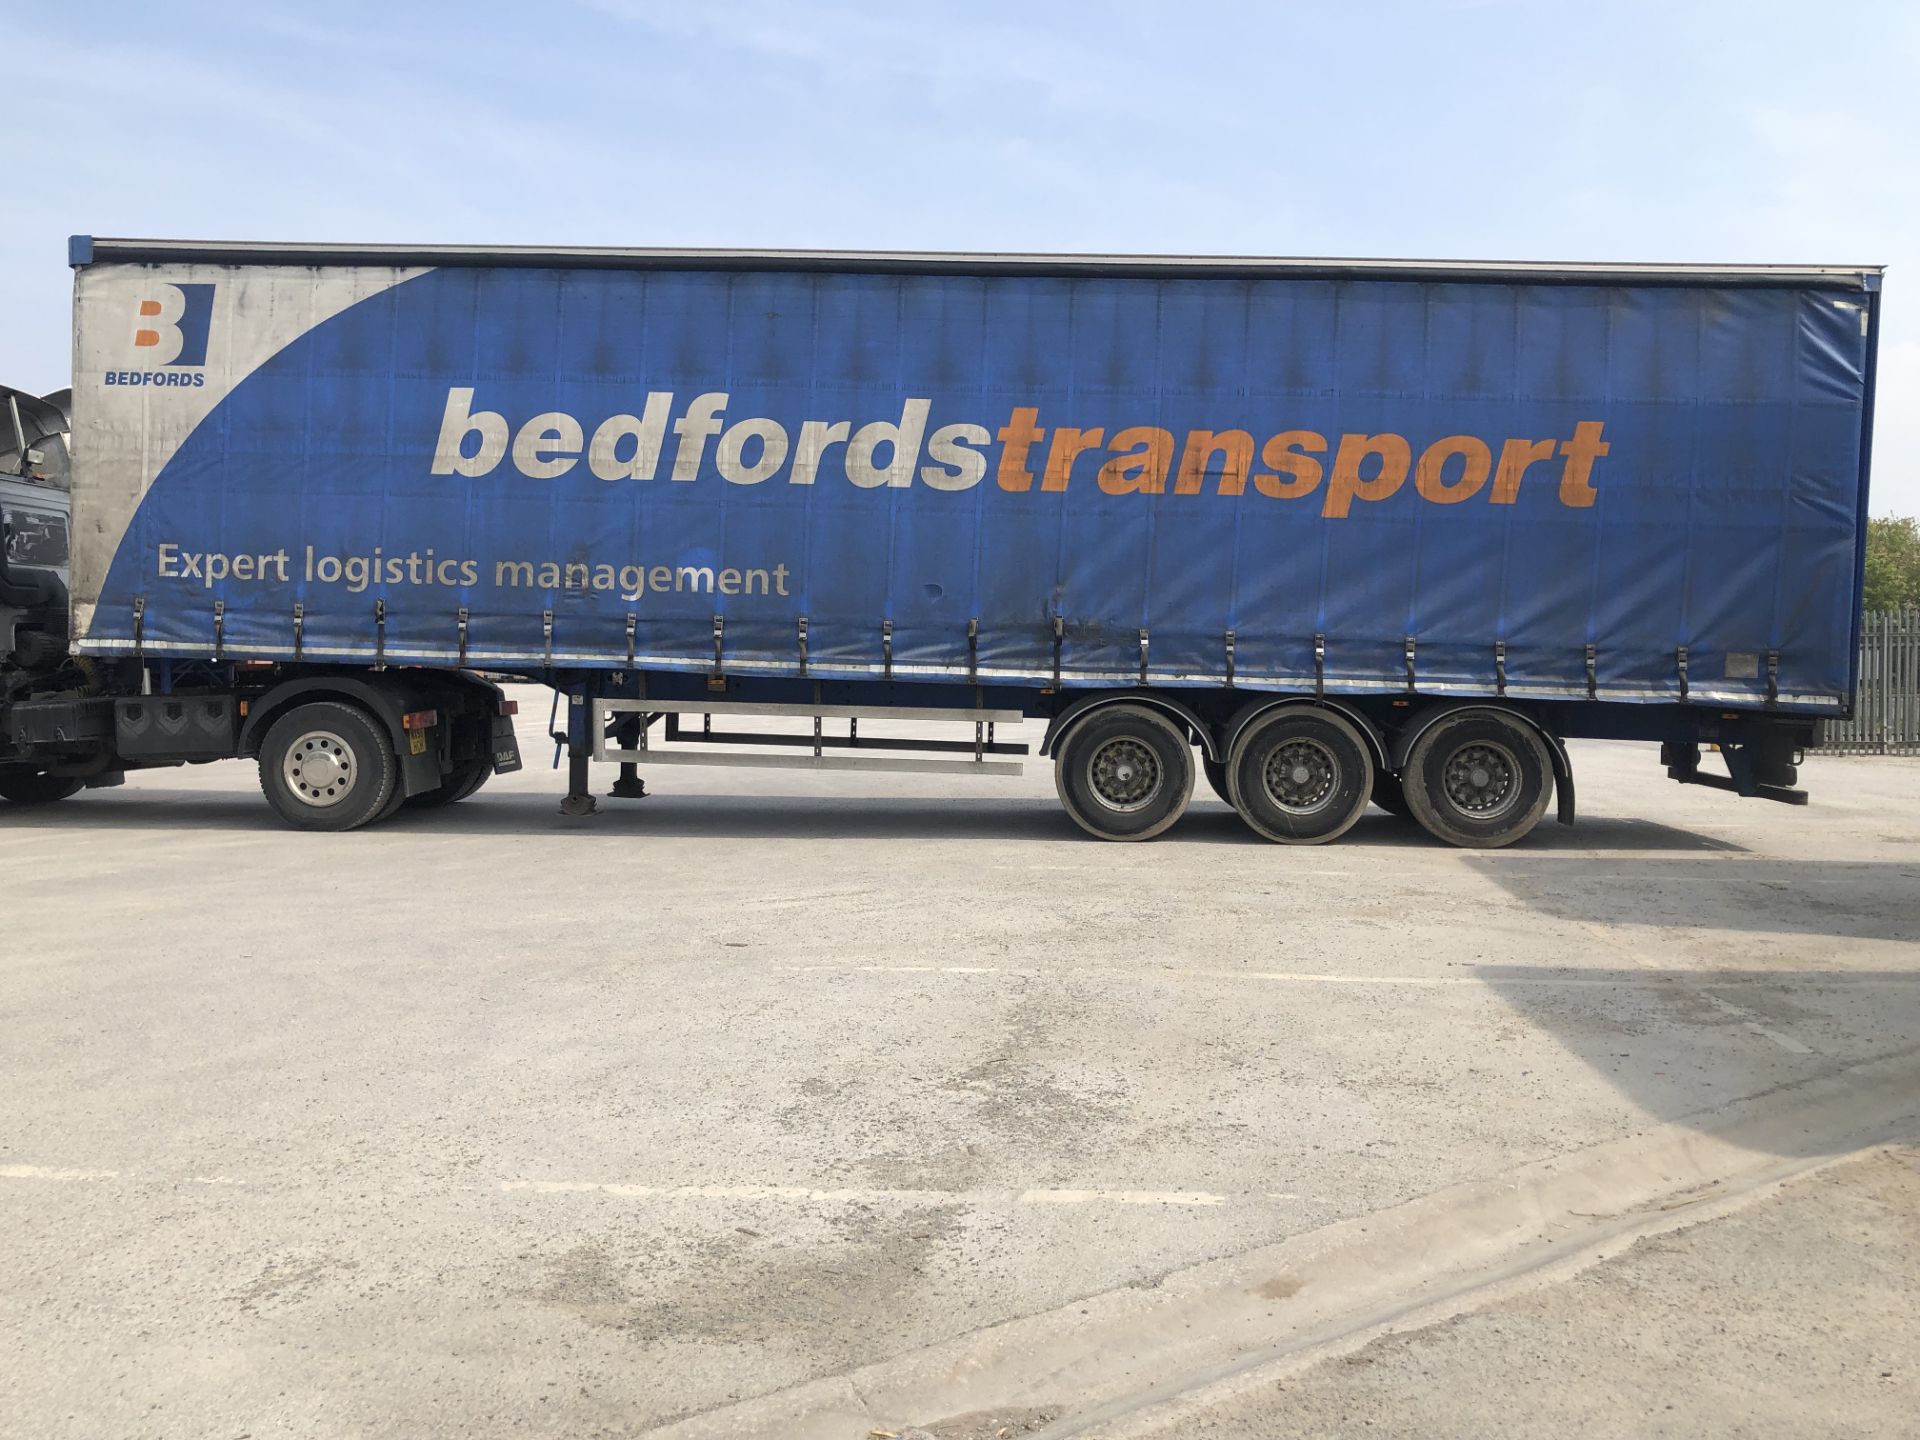 SDC 13.6m Tri-Axle Curtainside Double Deck Semi-Trailer, chassis no. 113833, ID no. C320208, year of - Image 4 of 10